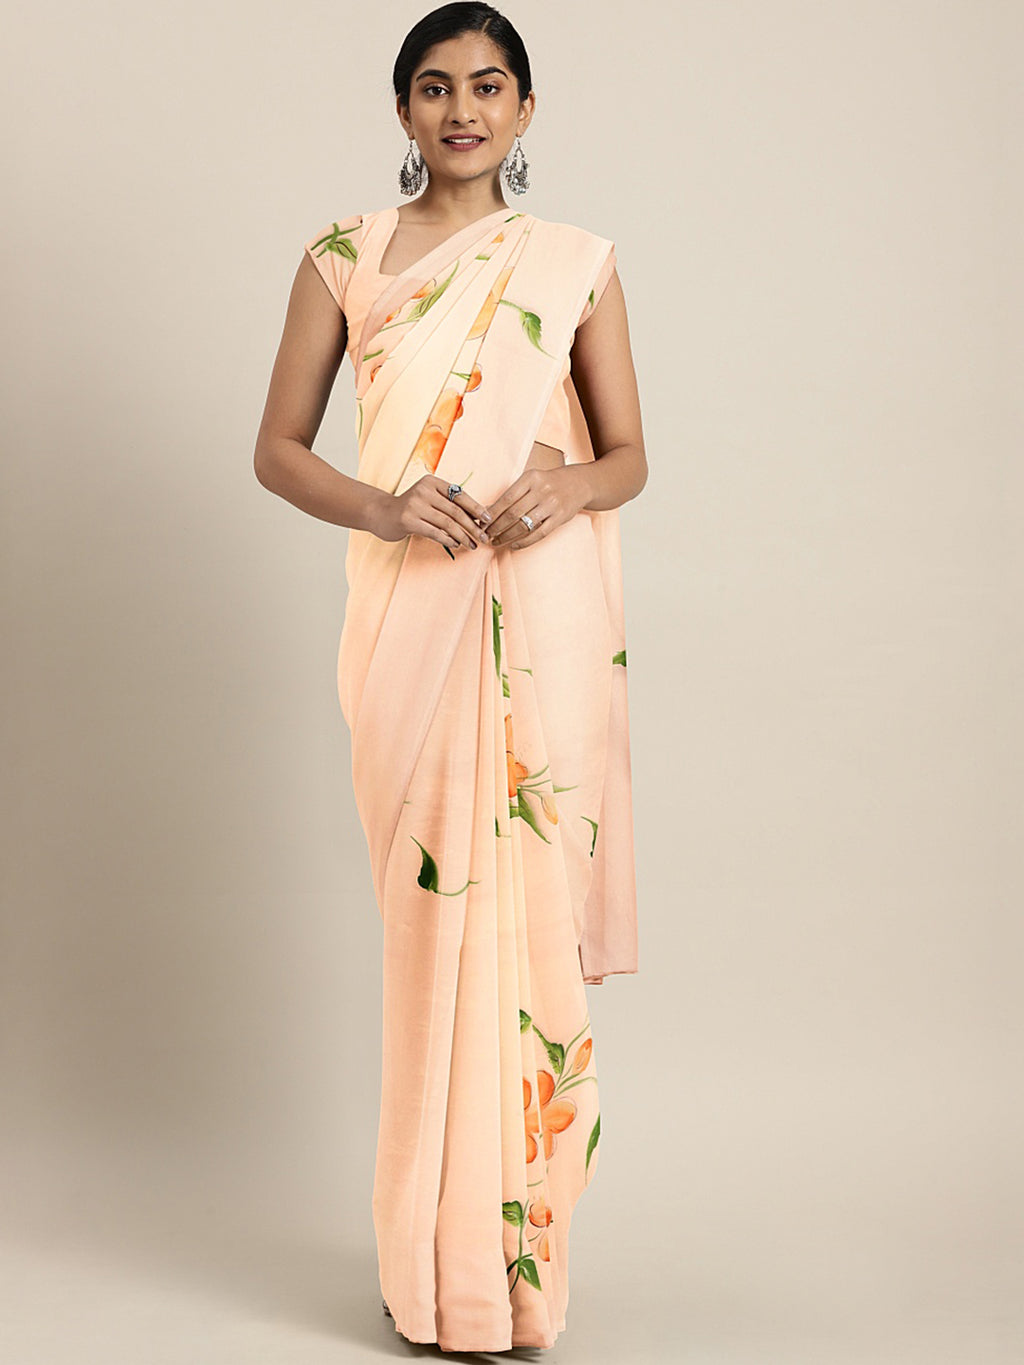 Kalakari India Organza Hand Painted Saree With Blouse BHKPSA0161-Saree-Kalakari India-BHKPSA0161-Bollywood, Fashion, Geographical Indication, Hand Crafted, Heritage Prints, Natural Dyes, Organza, Sarees, Sustainable Fabrics, Woven-[Linen,Ethnic,wear,Fashionista,Handloom,Handicraft,Indigo,blockprint,block,print,Cotton,Chanderi,Blue, latest,classy,party,bollywood,trendy,summer,style,traditional,formal,elegant,unique,style,hand,block,print, dabu,booti,gift,present,glamorous,affordable,collectible,S